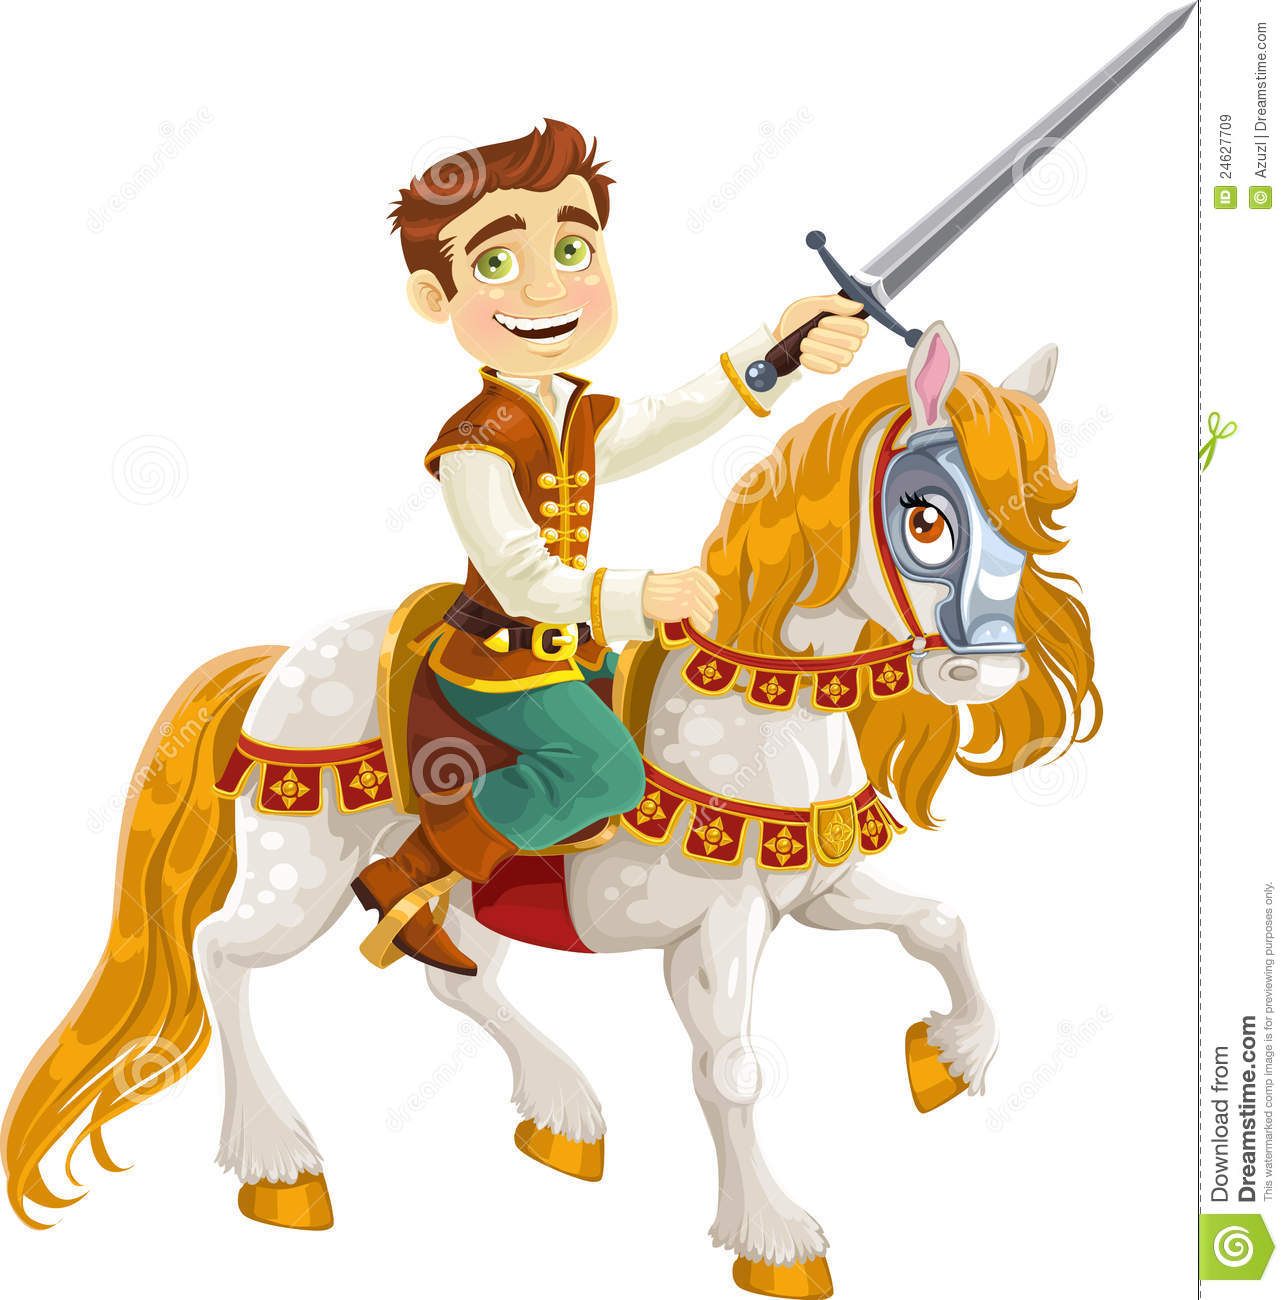 Prince Charming On A White Horse Royalty Free Stock Images   Image